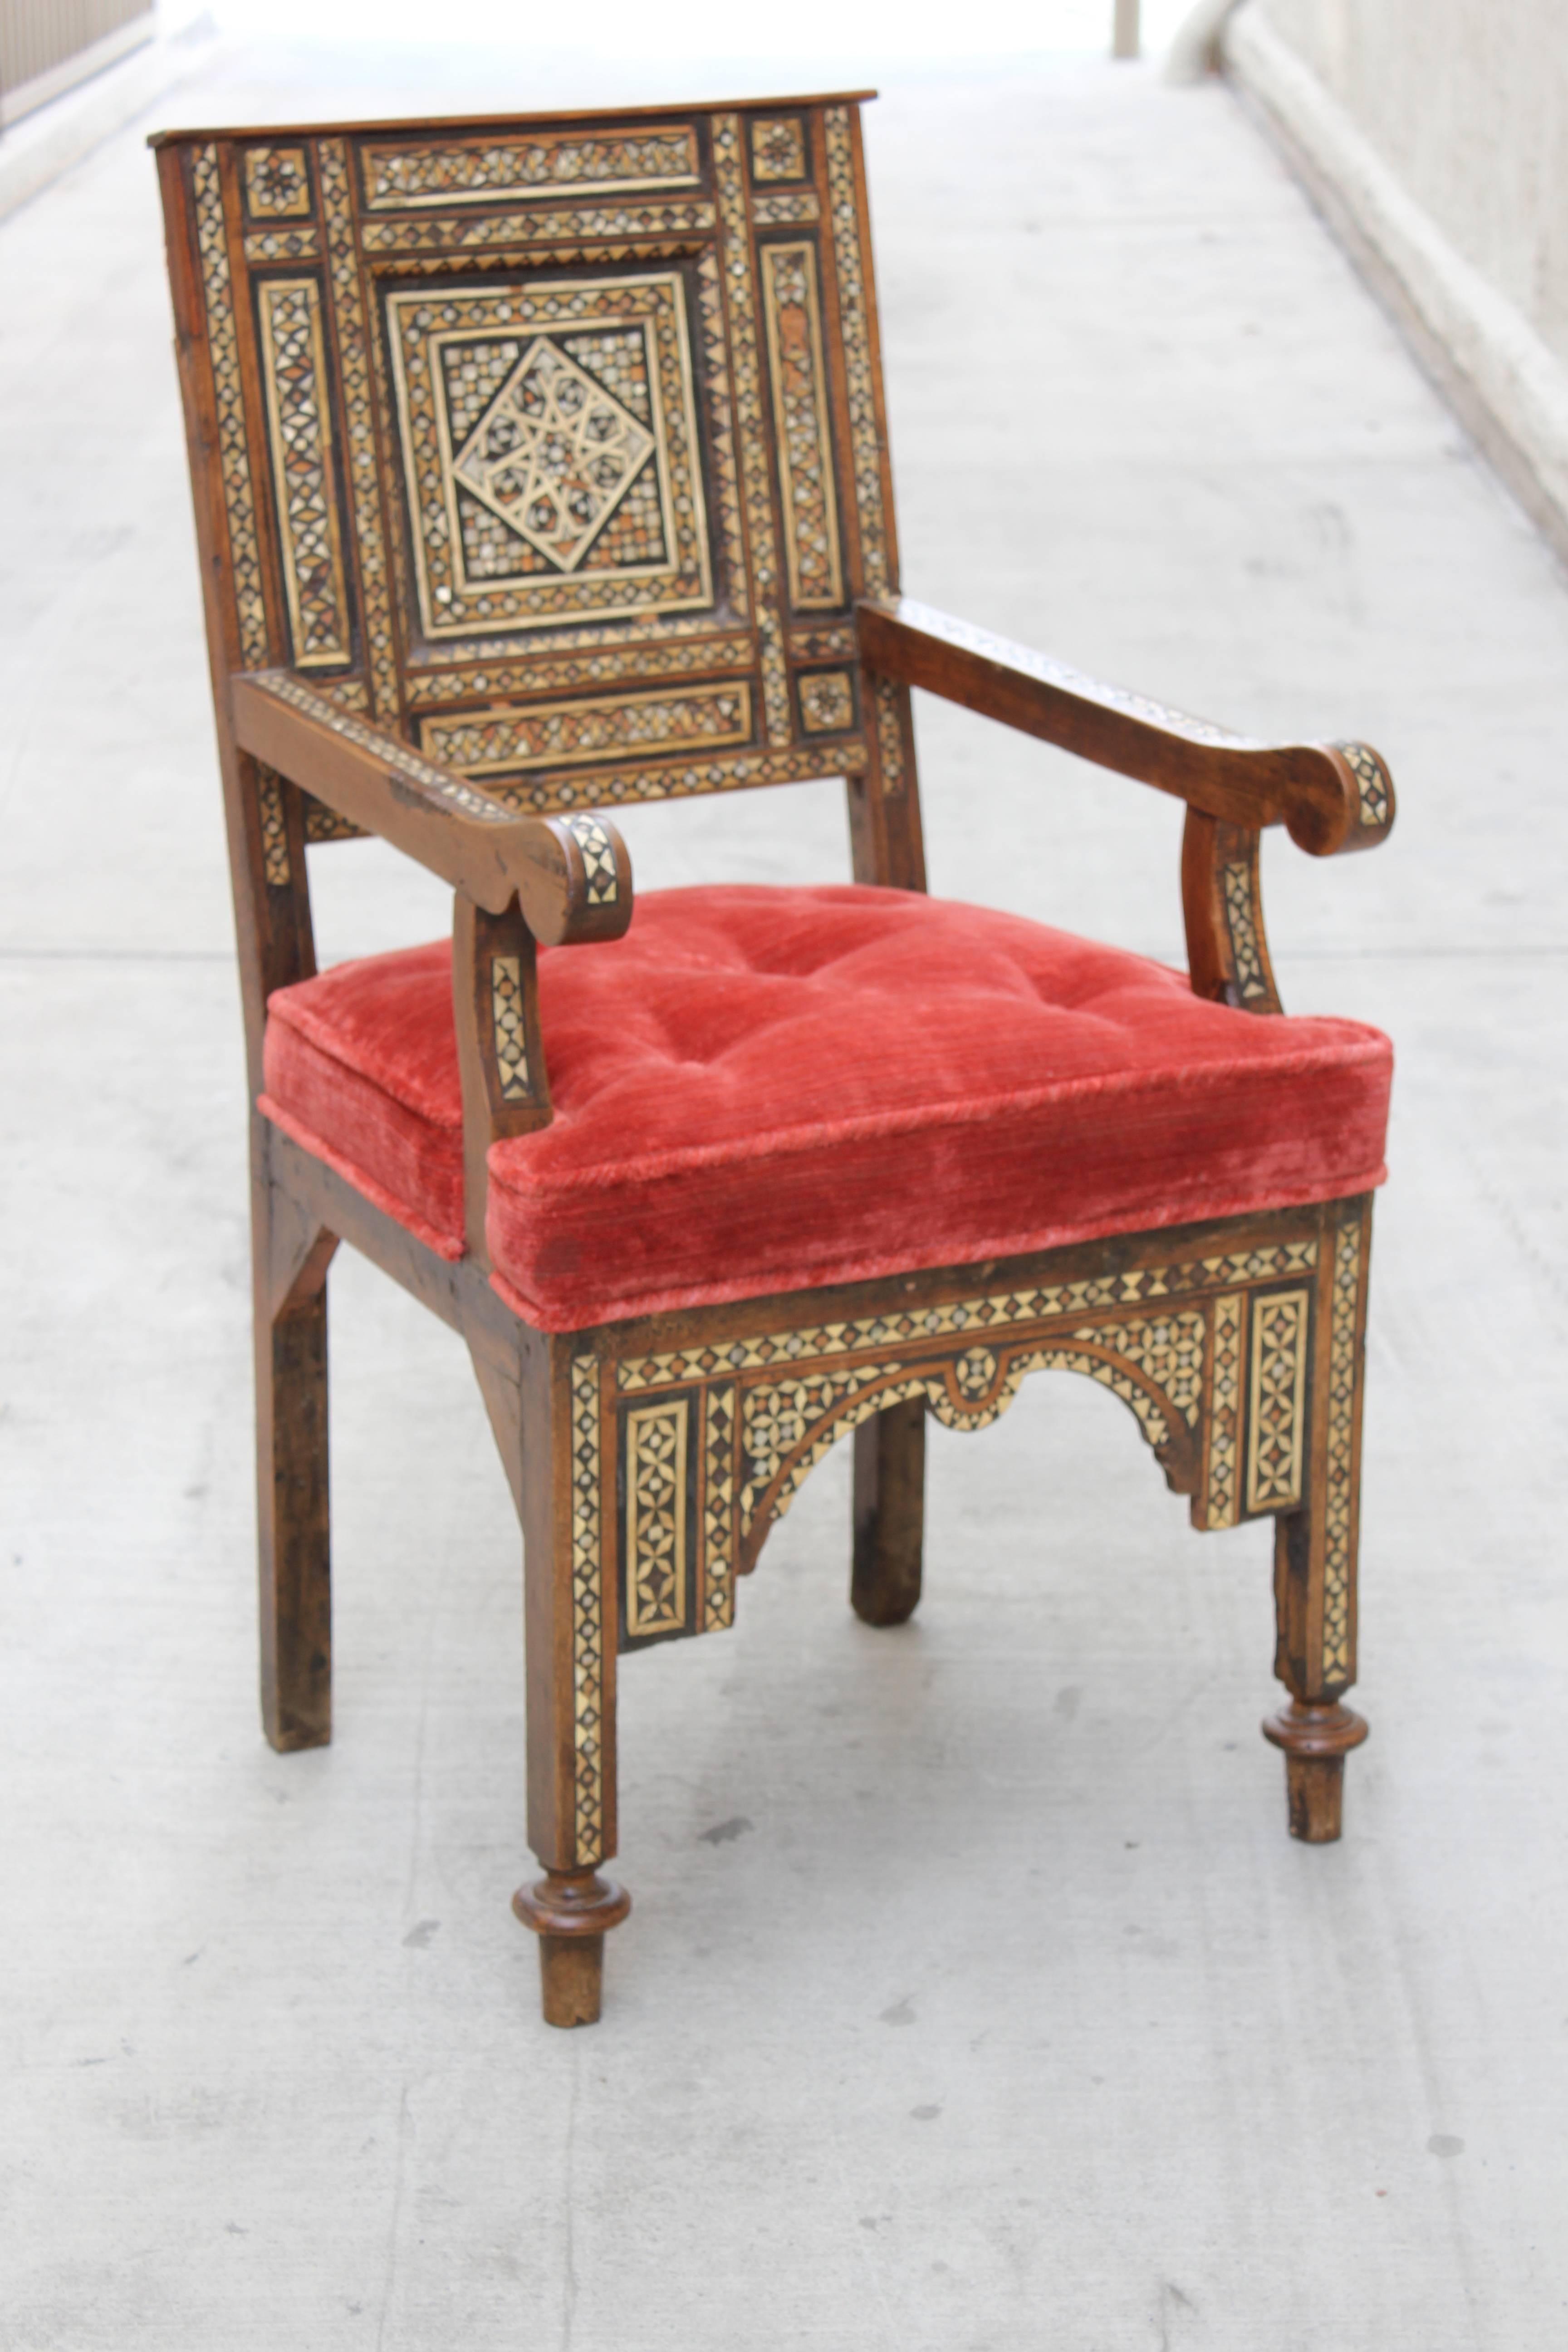 Newly upholstered in claremont fabric Syrian Mother-of-Pearl inlaid 19th century armchair. 28